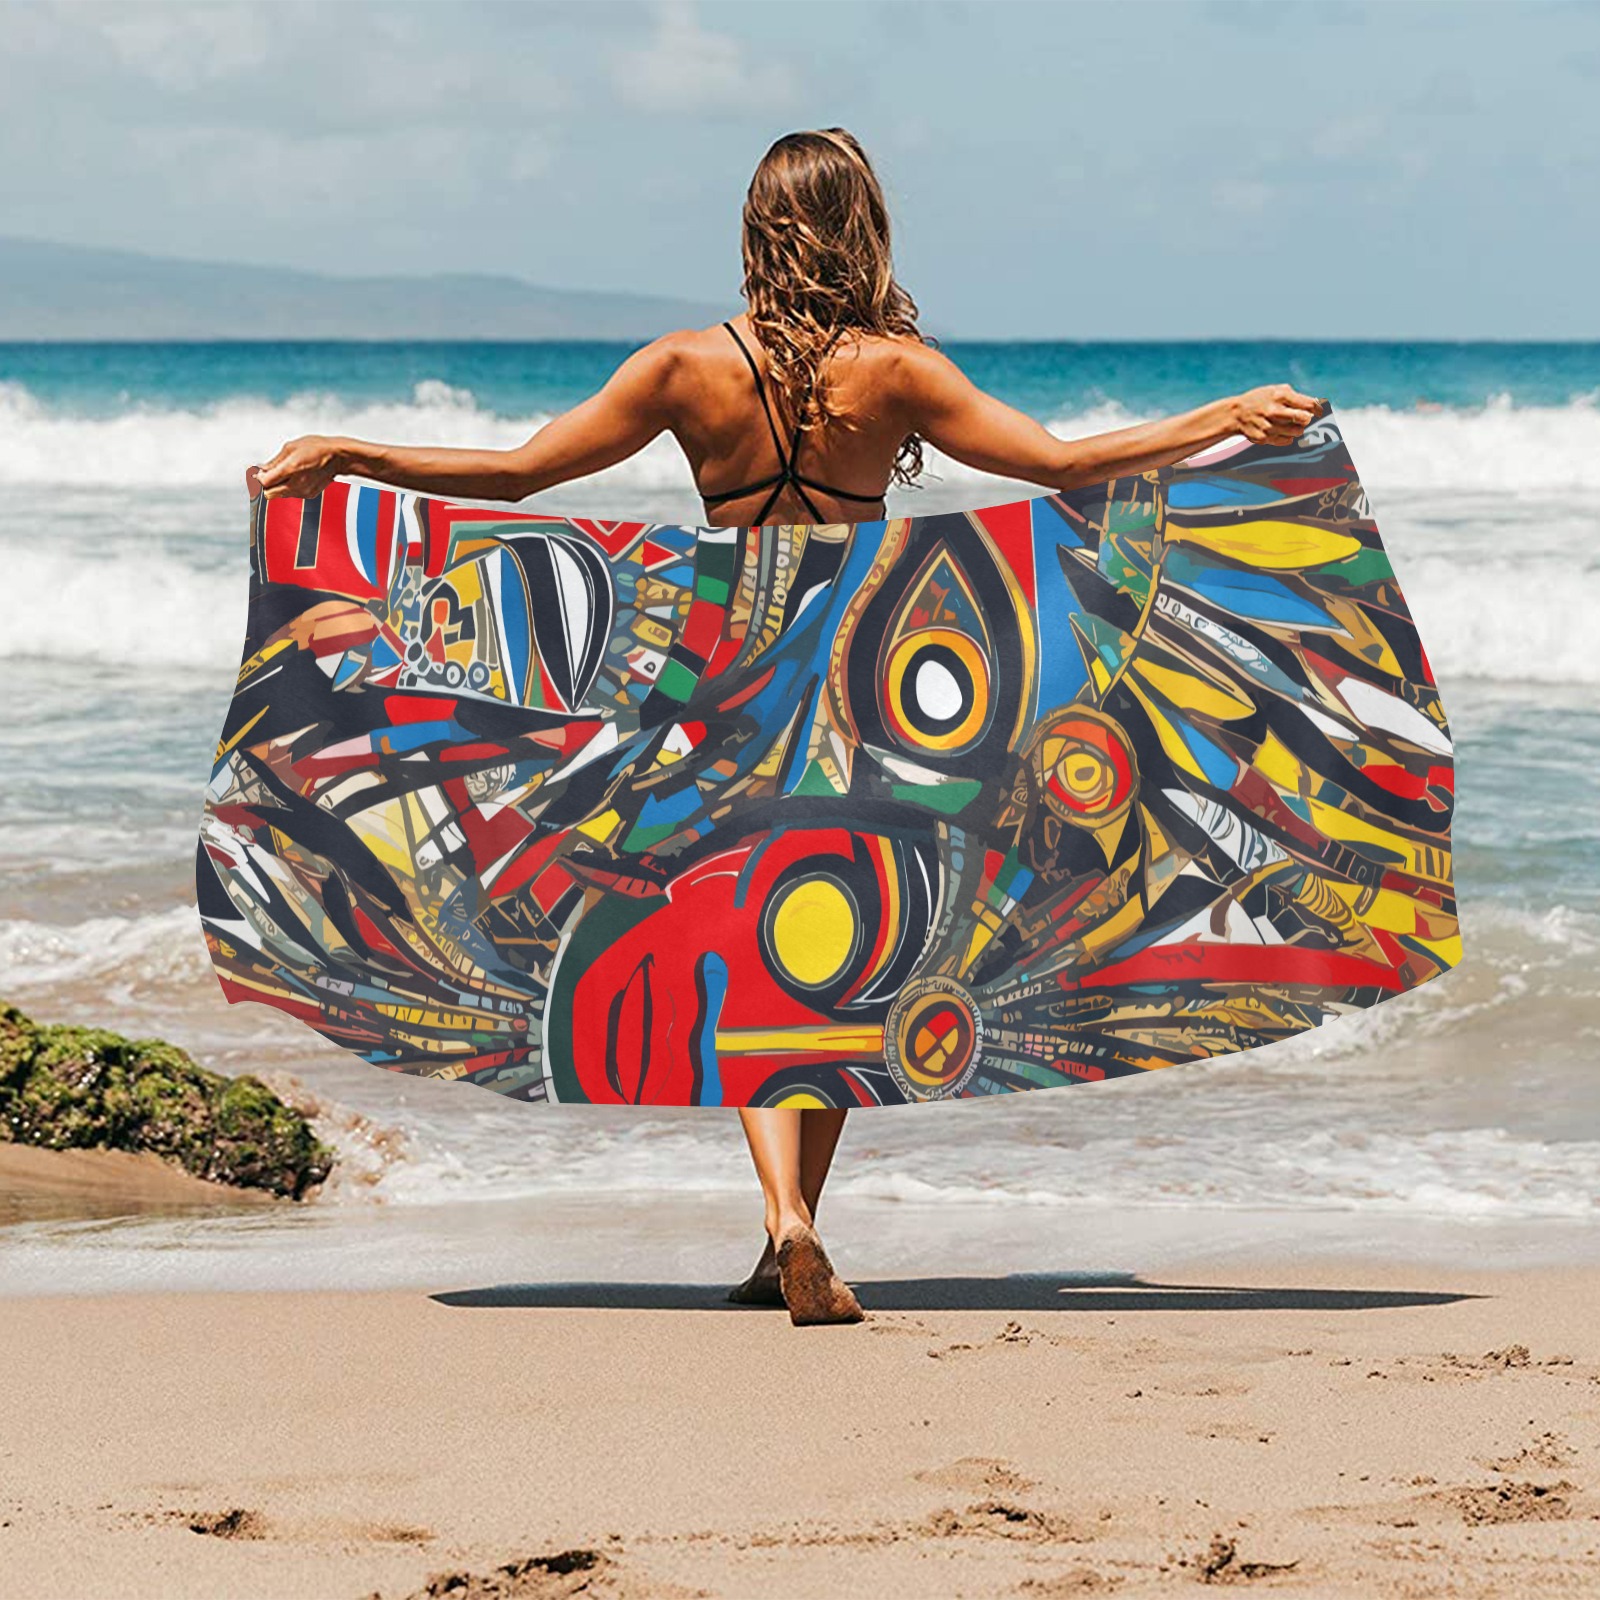 Chic abstract African masks. Colorful abstract art Beach Towel 32"x 71"